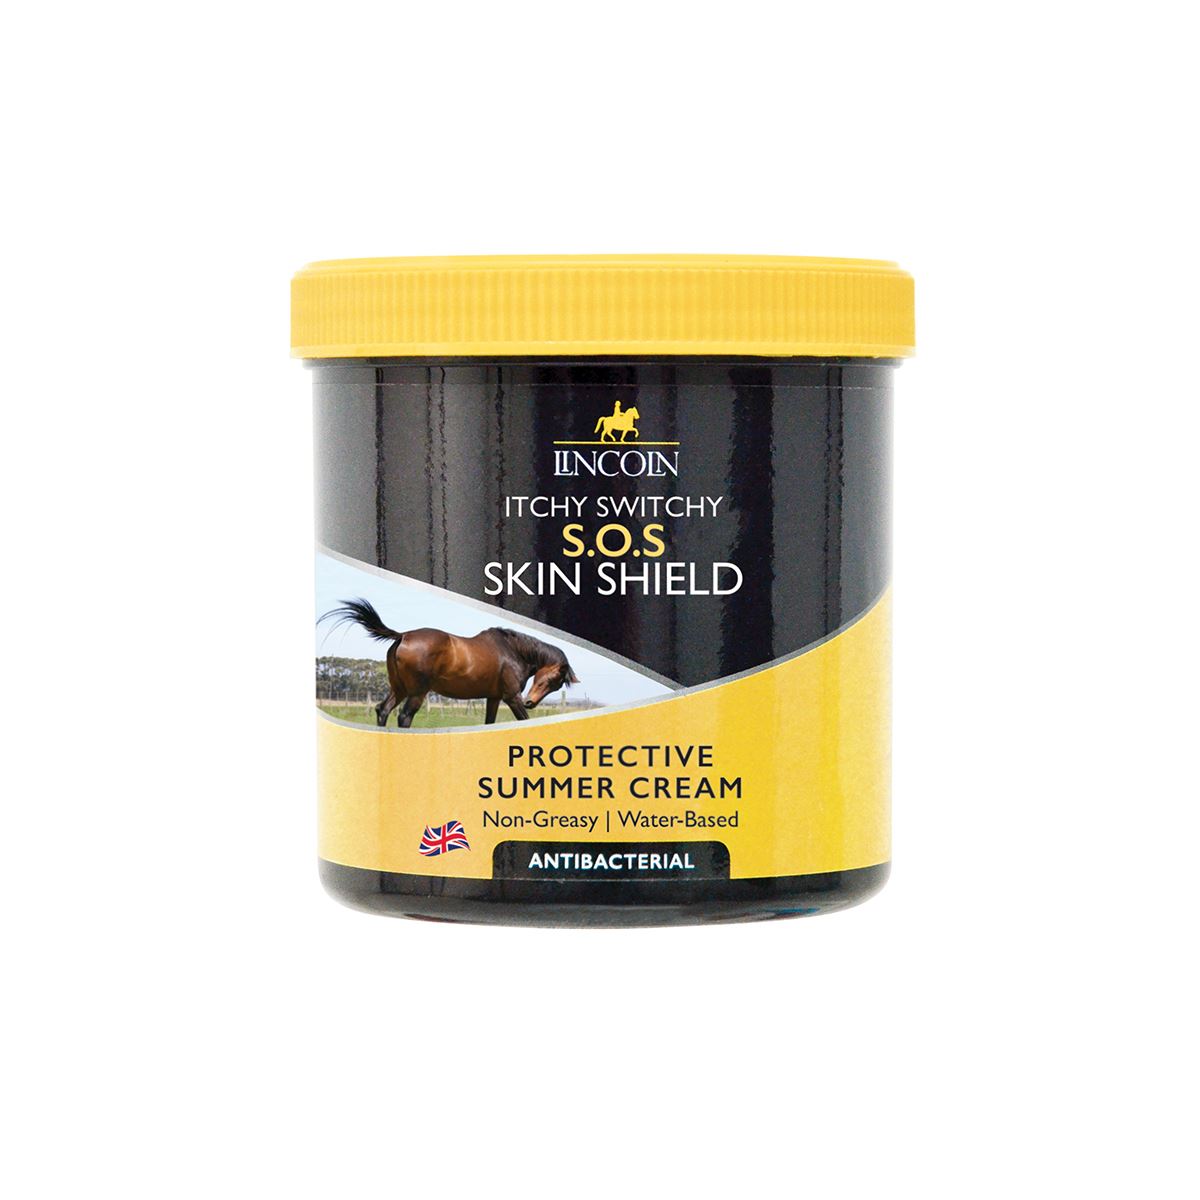 Lincoln Itchy Switchy S.O.S Skin Shield - Just Horse Riders